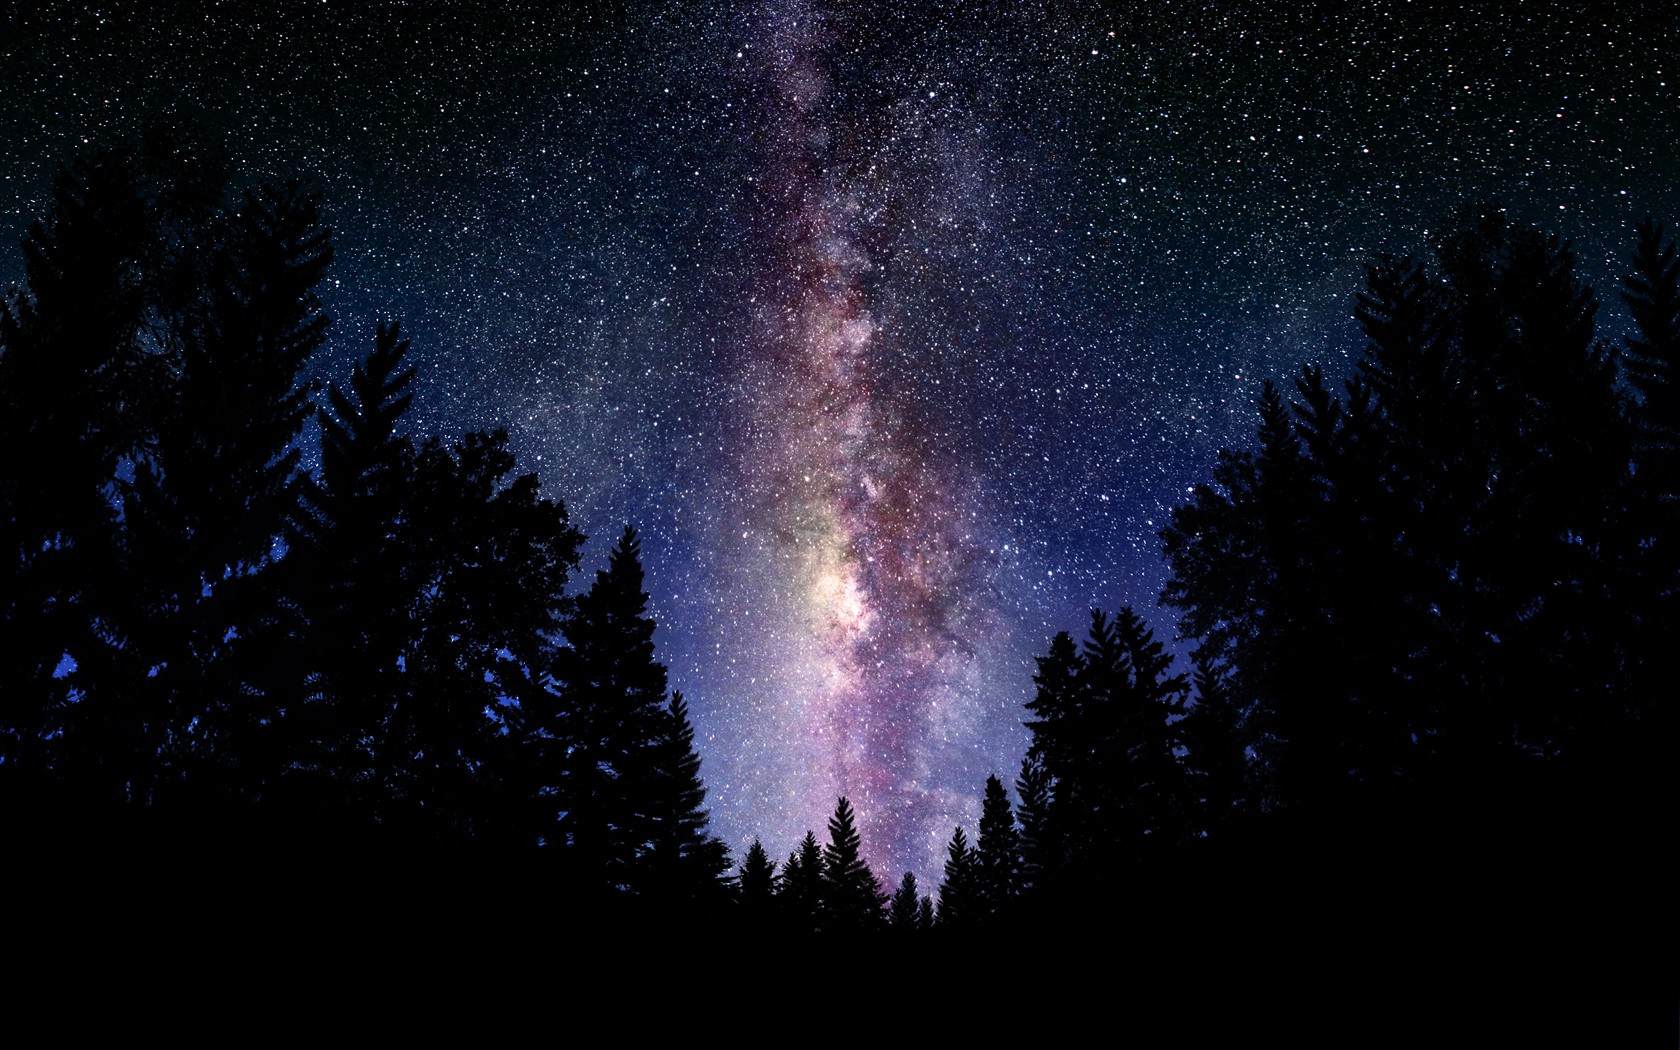 General 1680x1050 stars Milky Way space art space night trees nature starry night sky outdoors